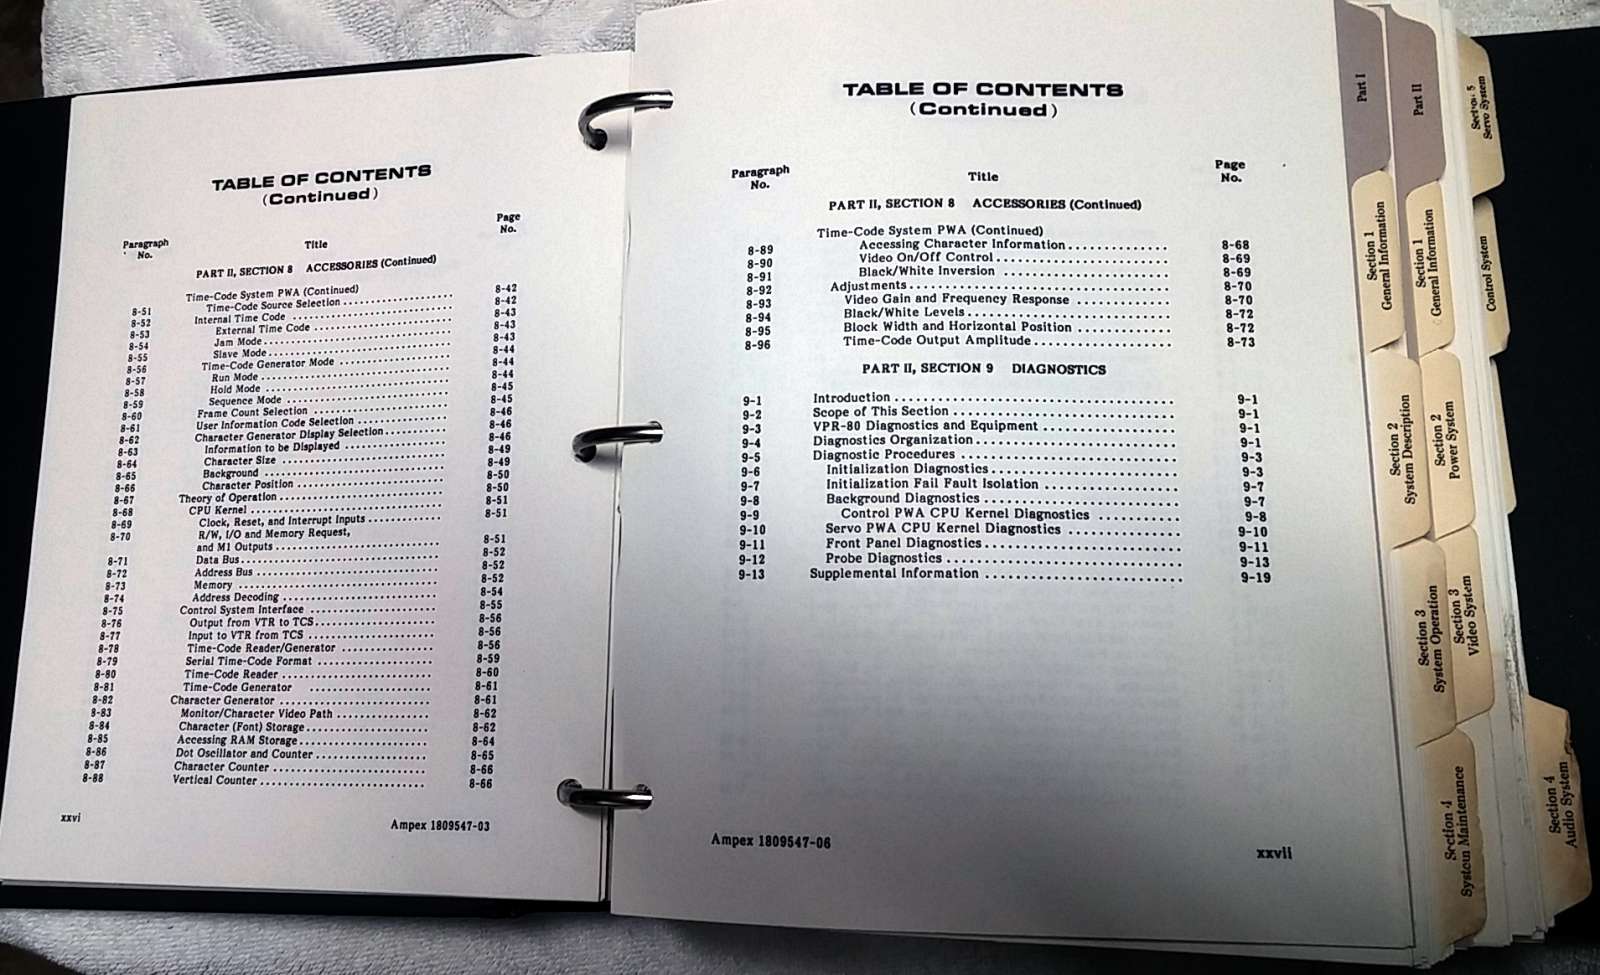  Service Manual for the CVR-70 and SONY BVW-70 ampex betacam sp sony betacam sp 1/2 inch tape video tape professional video tape bvw-70 cvr-70 bvw70 cvr70 